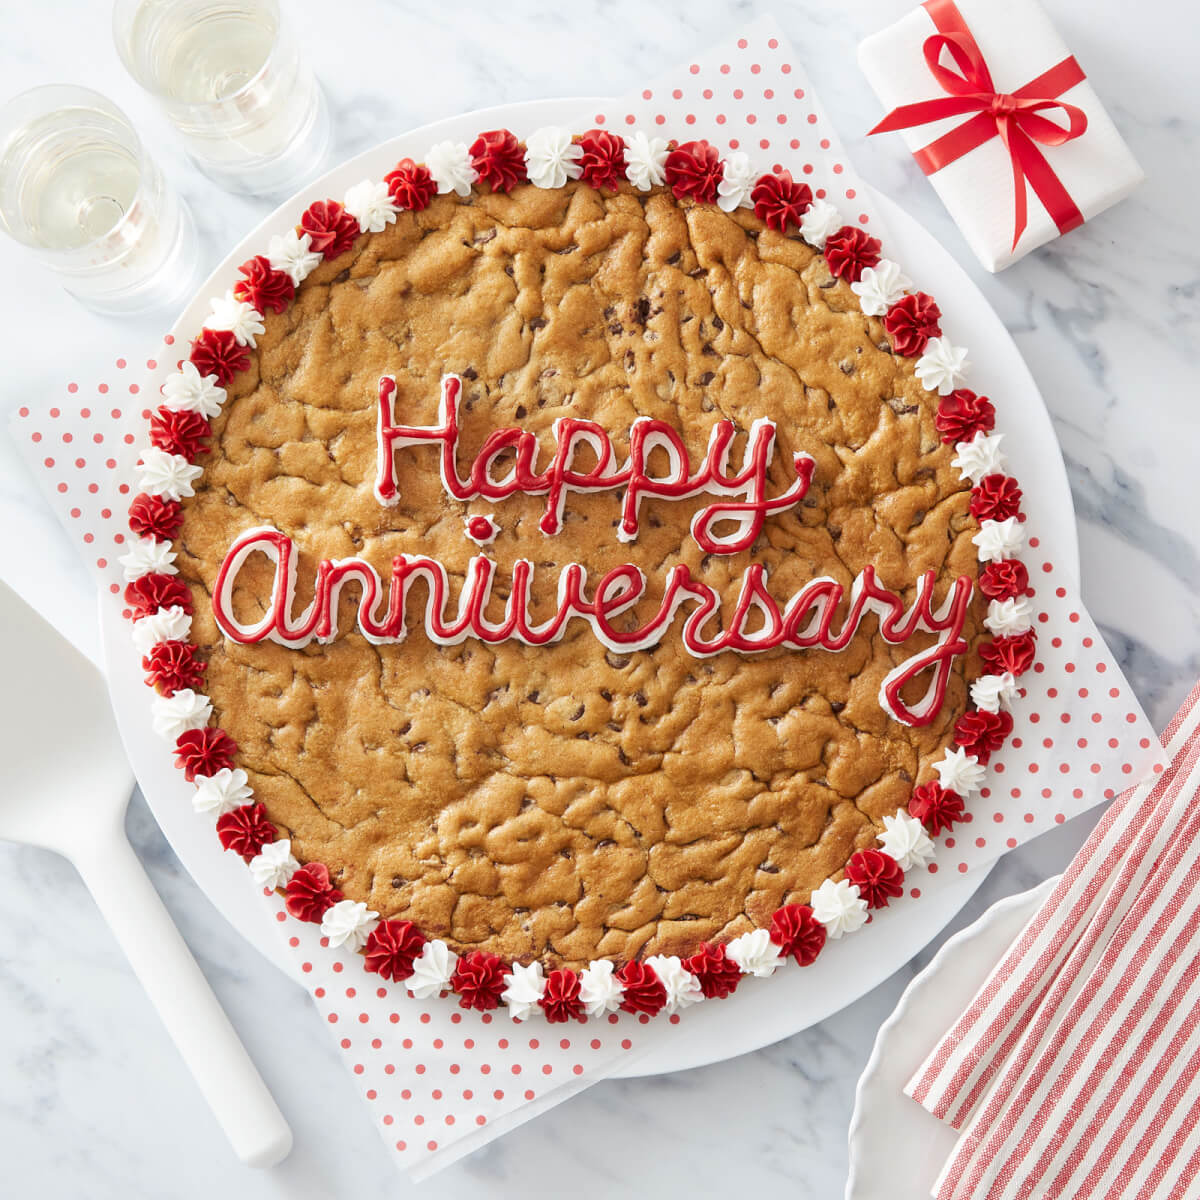 Custom cookie cake with "Happy Anniversary" written in red and white frosting